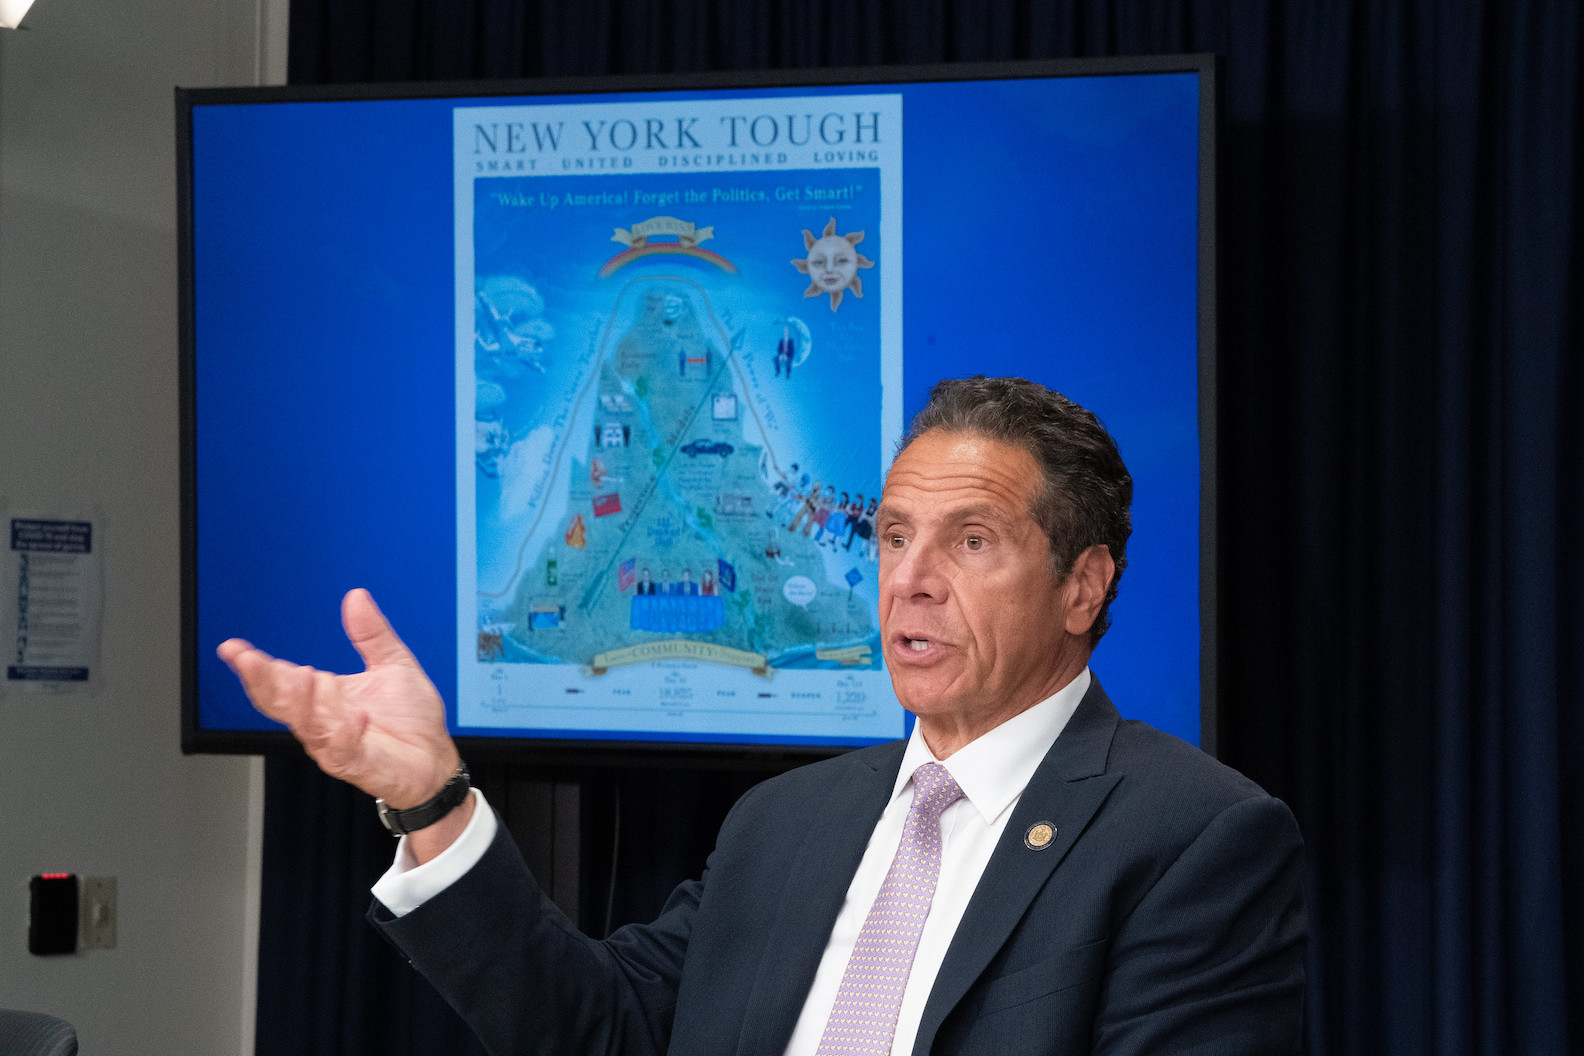 Gov. Andrew Cuomo addressed the media on July 13, issuing further guidance on how New York schools can reopen in the fall. (Images courtesy of the Office of Gov. Andrew M. Cuomo)